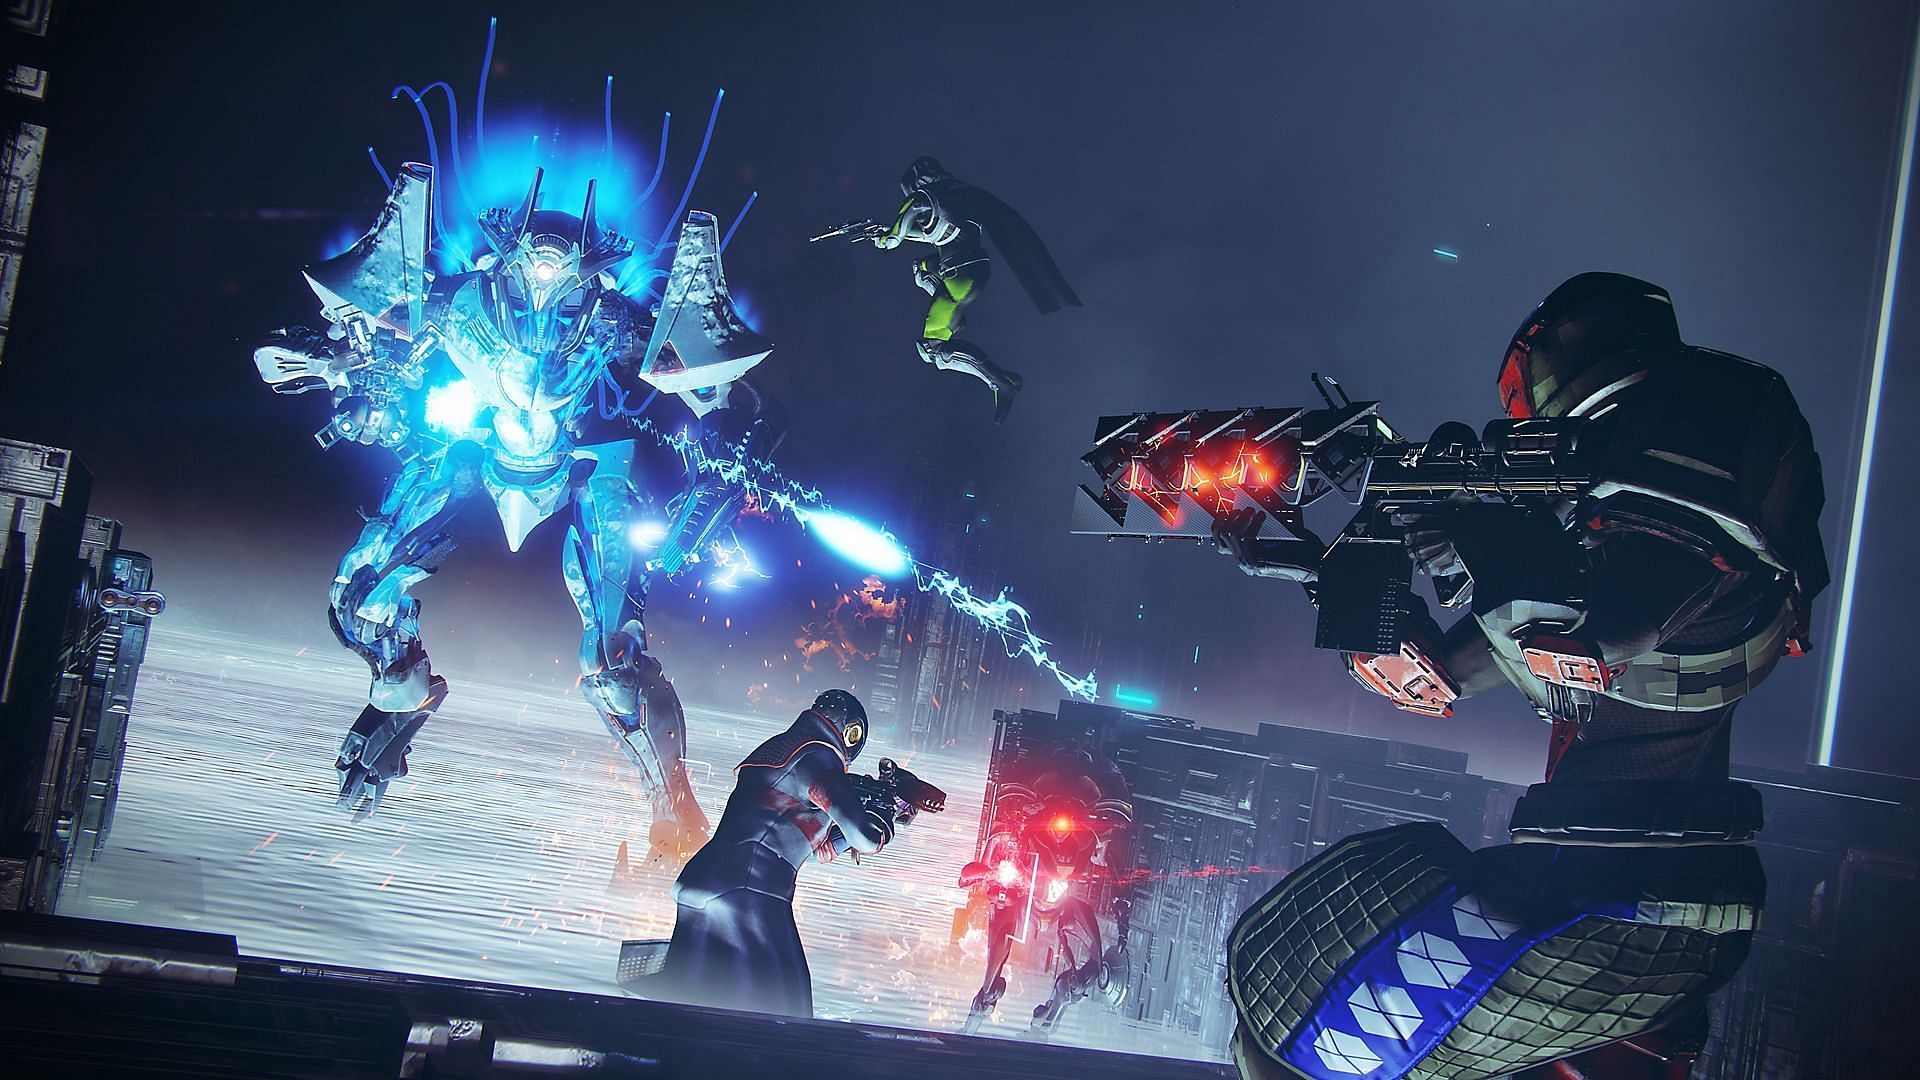 Destiny 2 is one of the video games that can be played alternatively with Call of Duty Warzone (Image via Bungie)